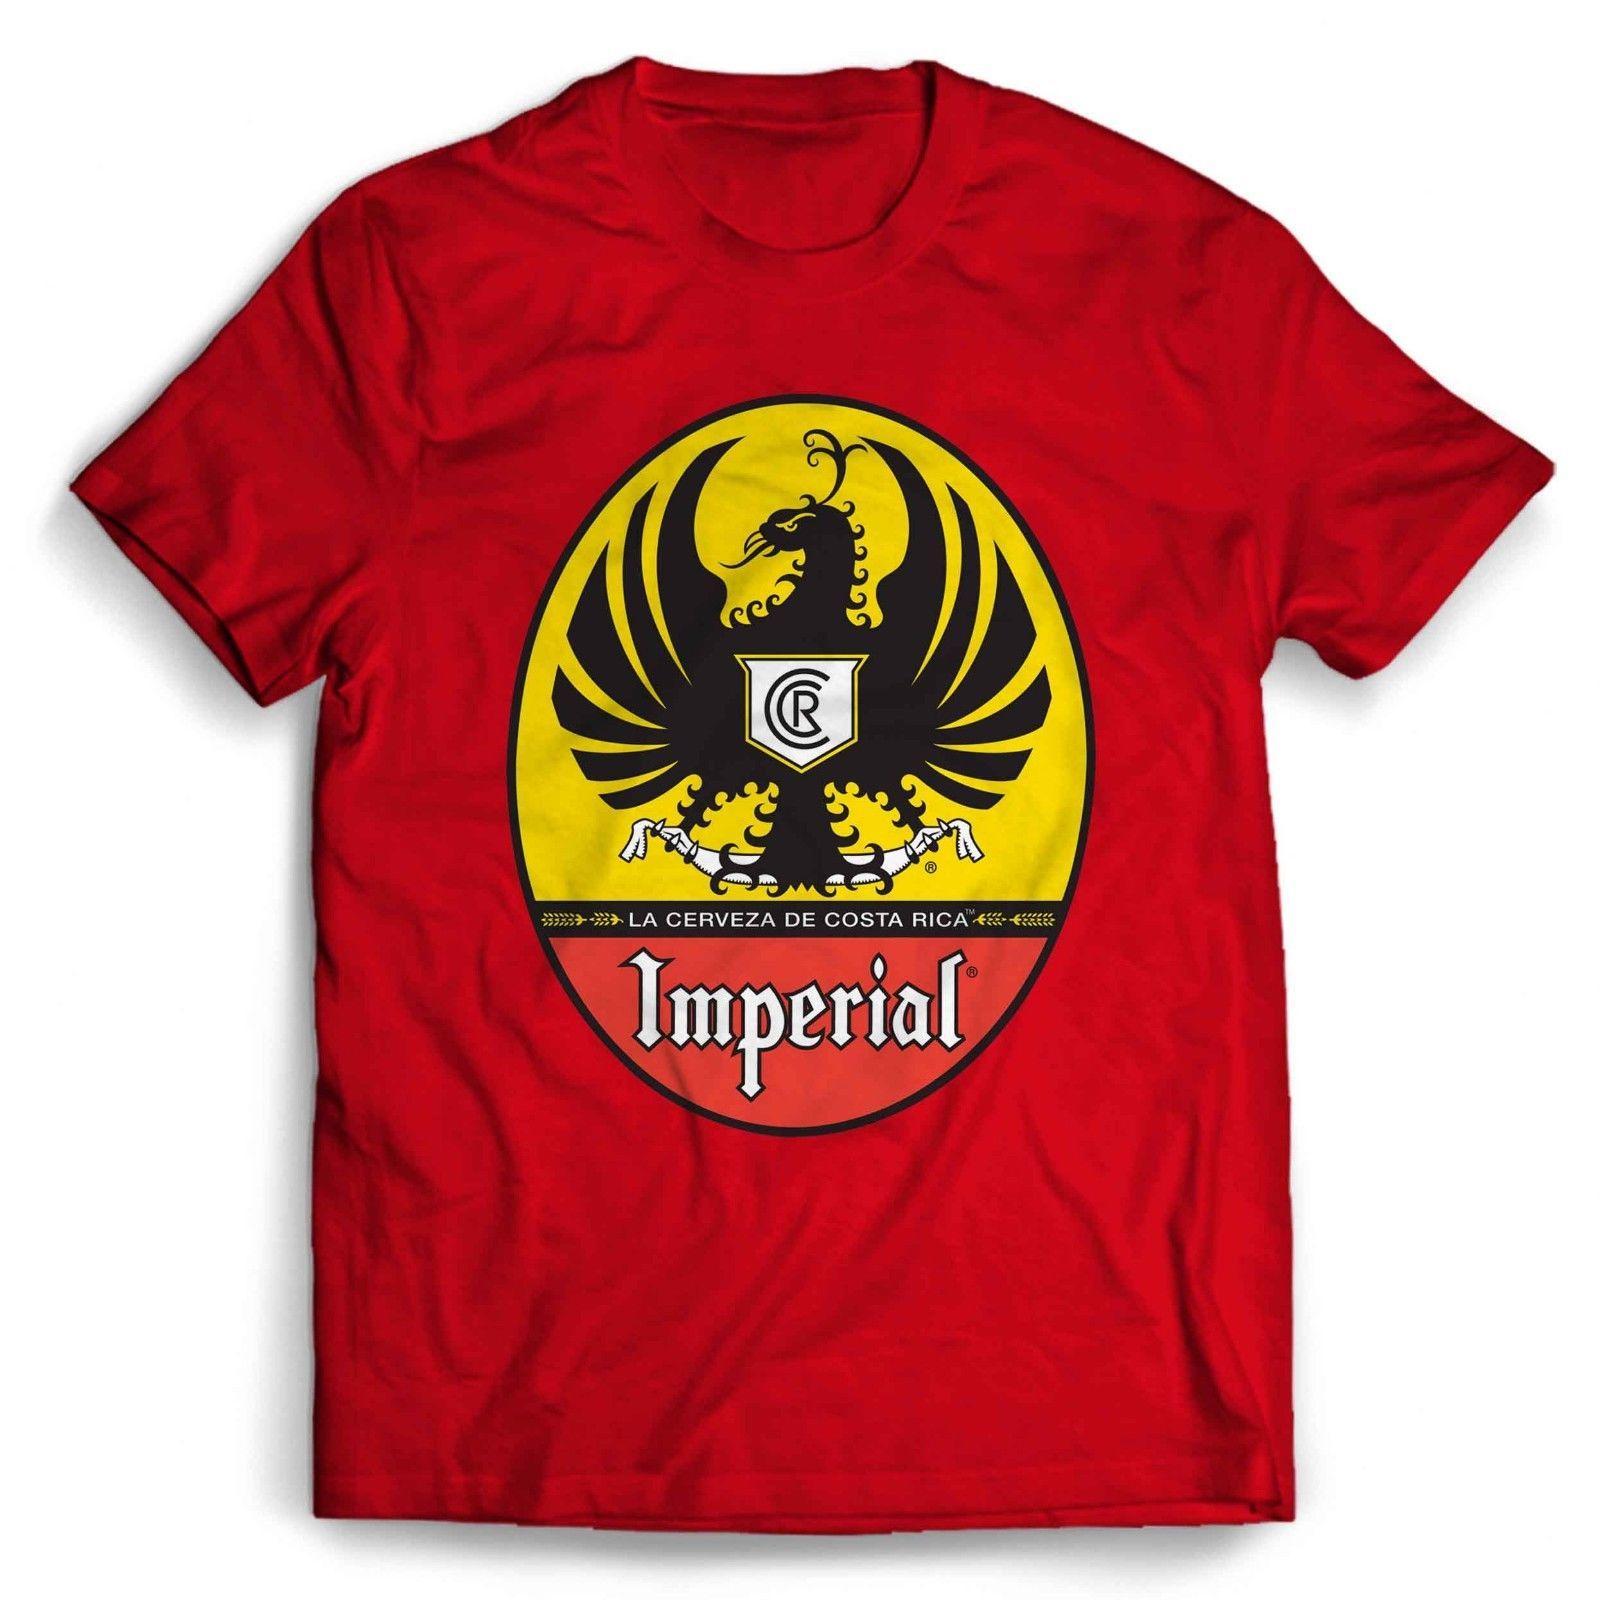 Funny Beer Logo - Imperial Beer Logo Man / Woman T Shirt Funny Casual Tshirt Top Funny